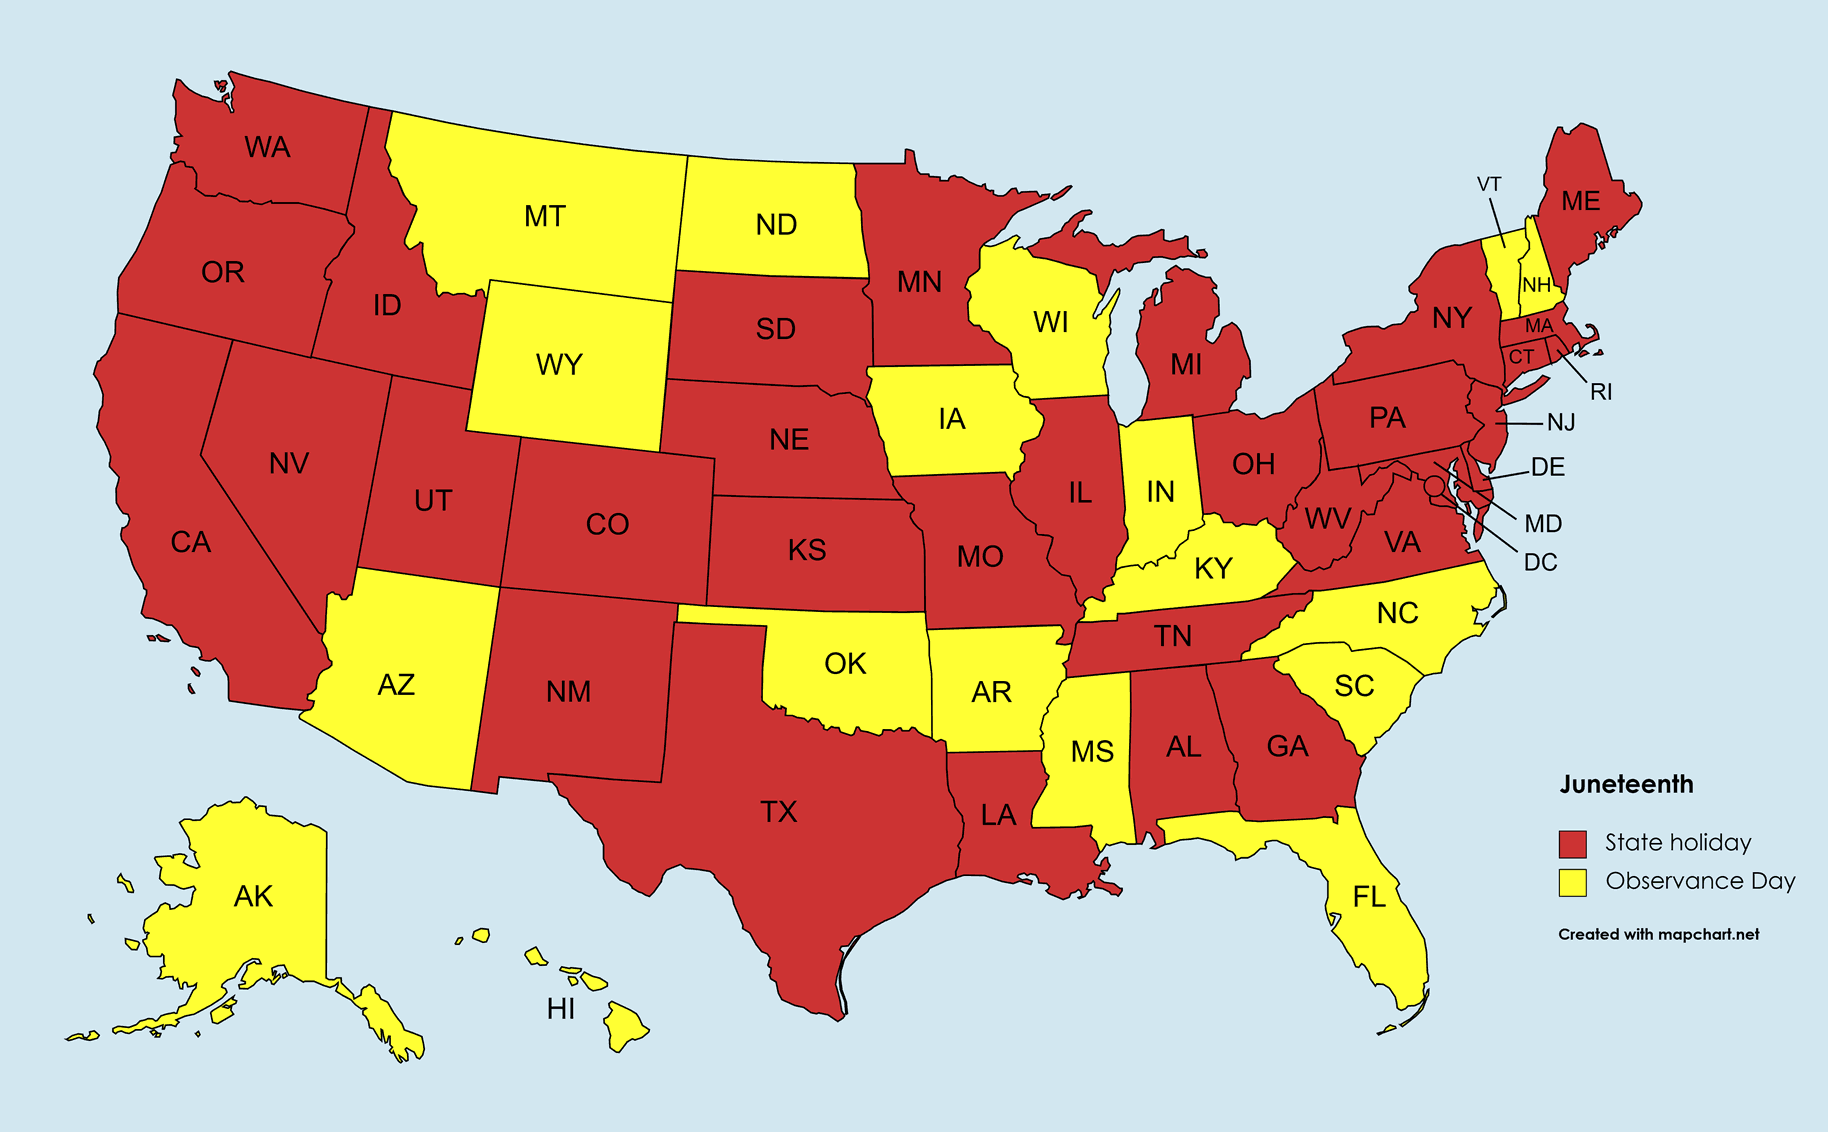 Juneeteenth by State